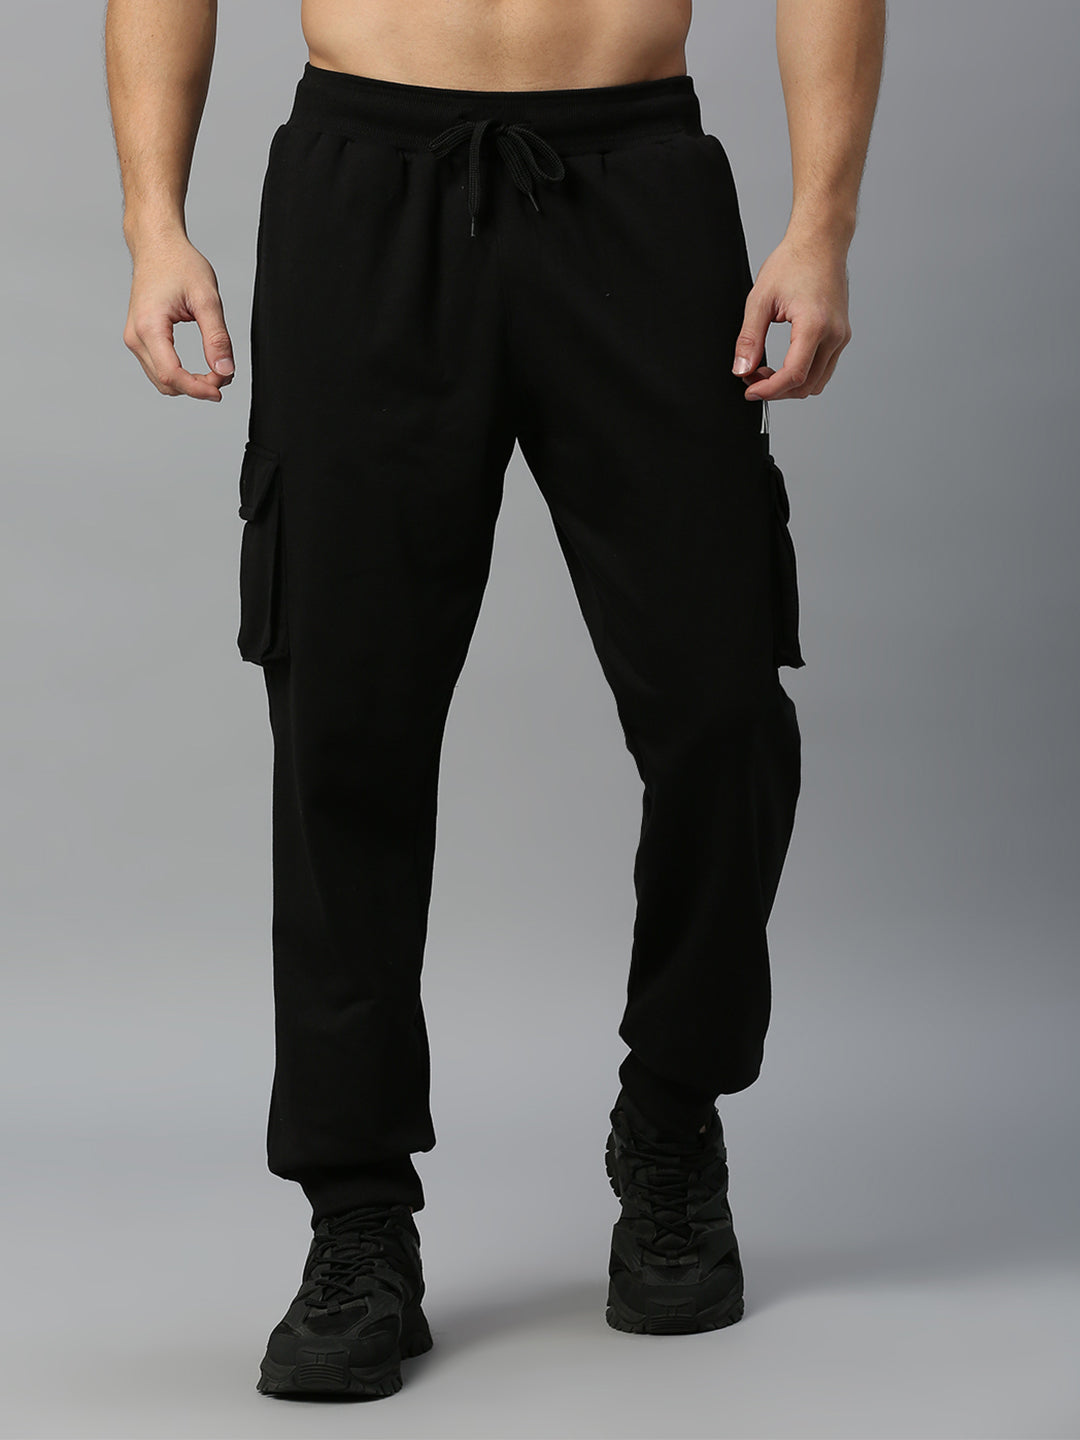 Shop Black Cargo Pants For Men Online At Best Price In India –  AestheticNation